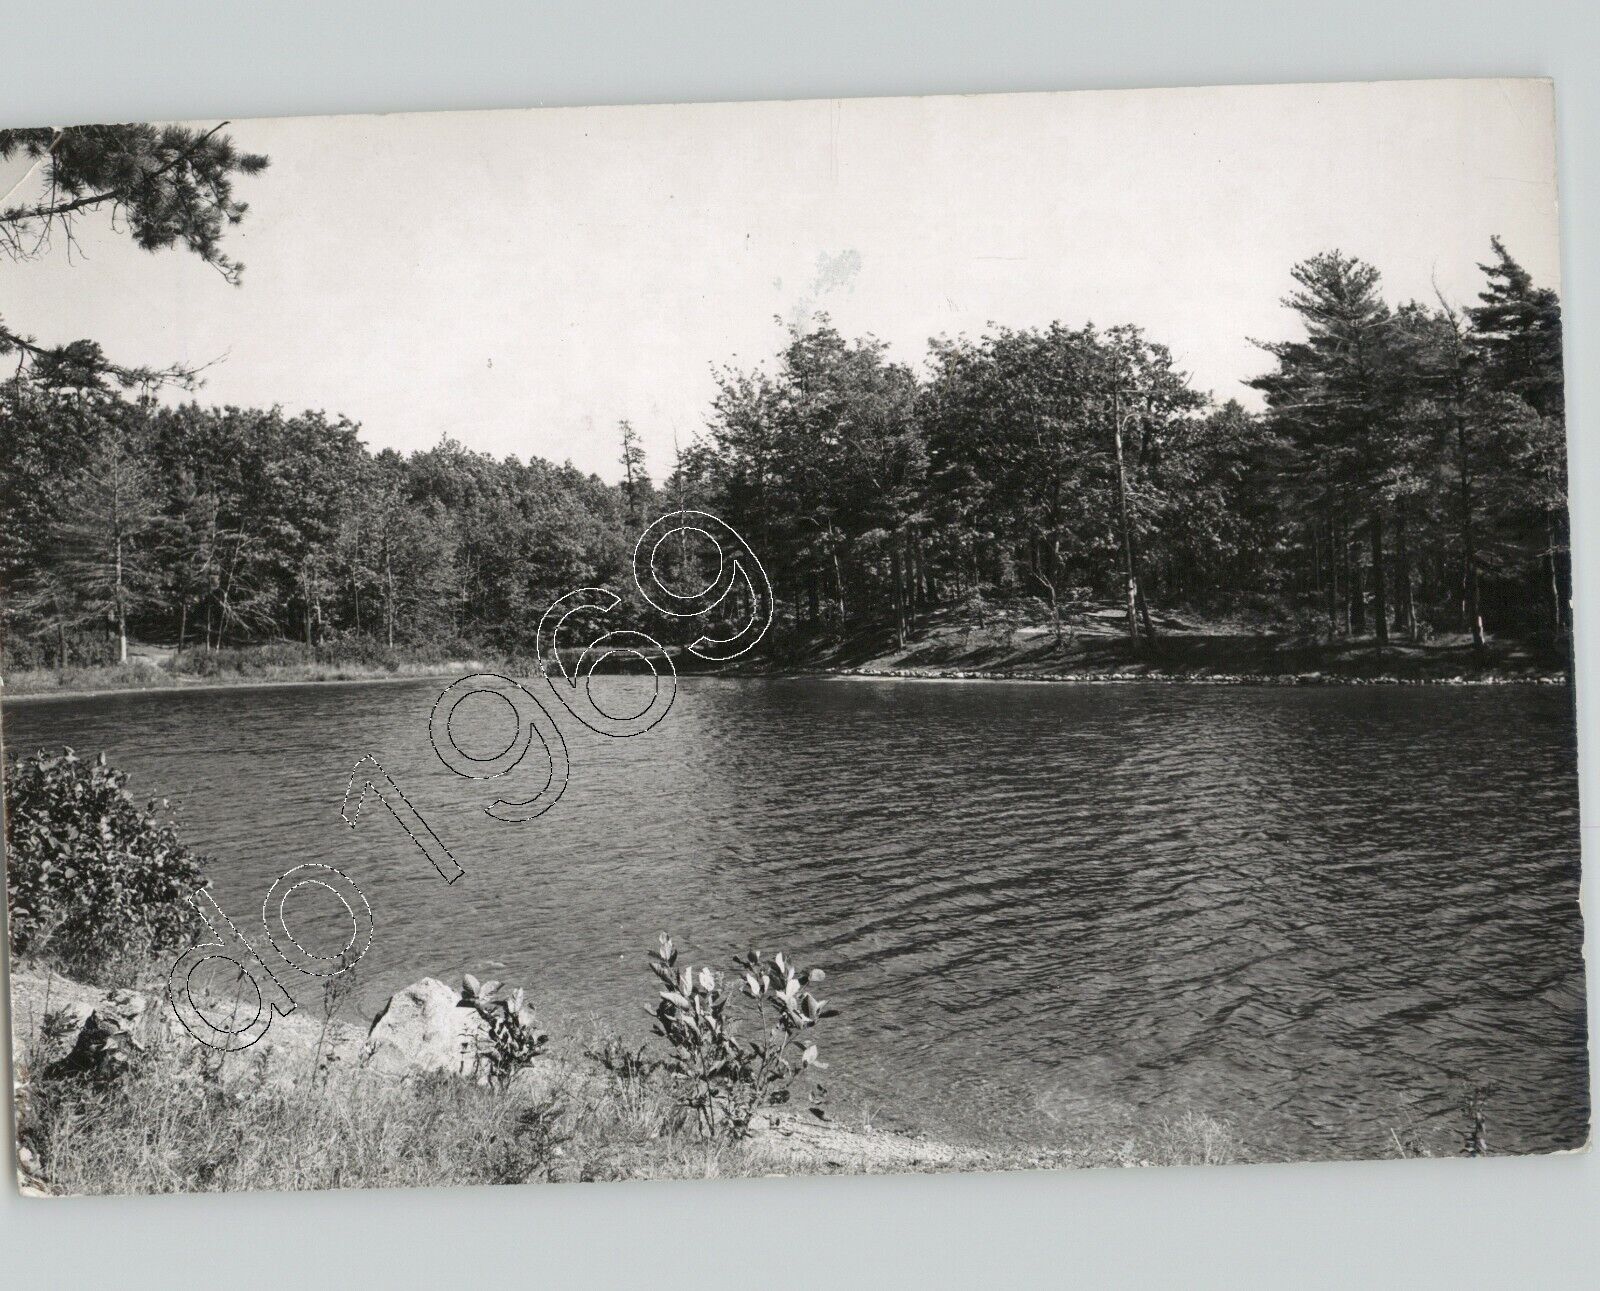 WALDEN POND, CONCORD, MASSACHUSETTS Poetry and Literature 1950s Press Photo